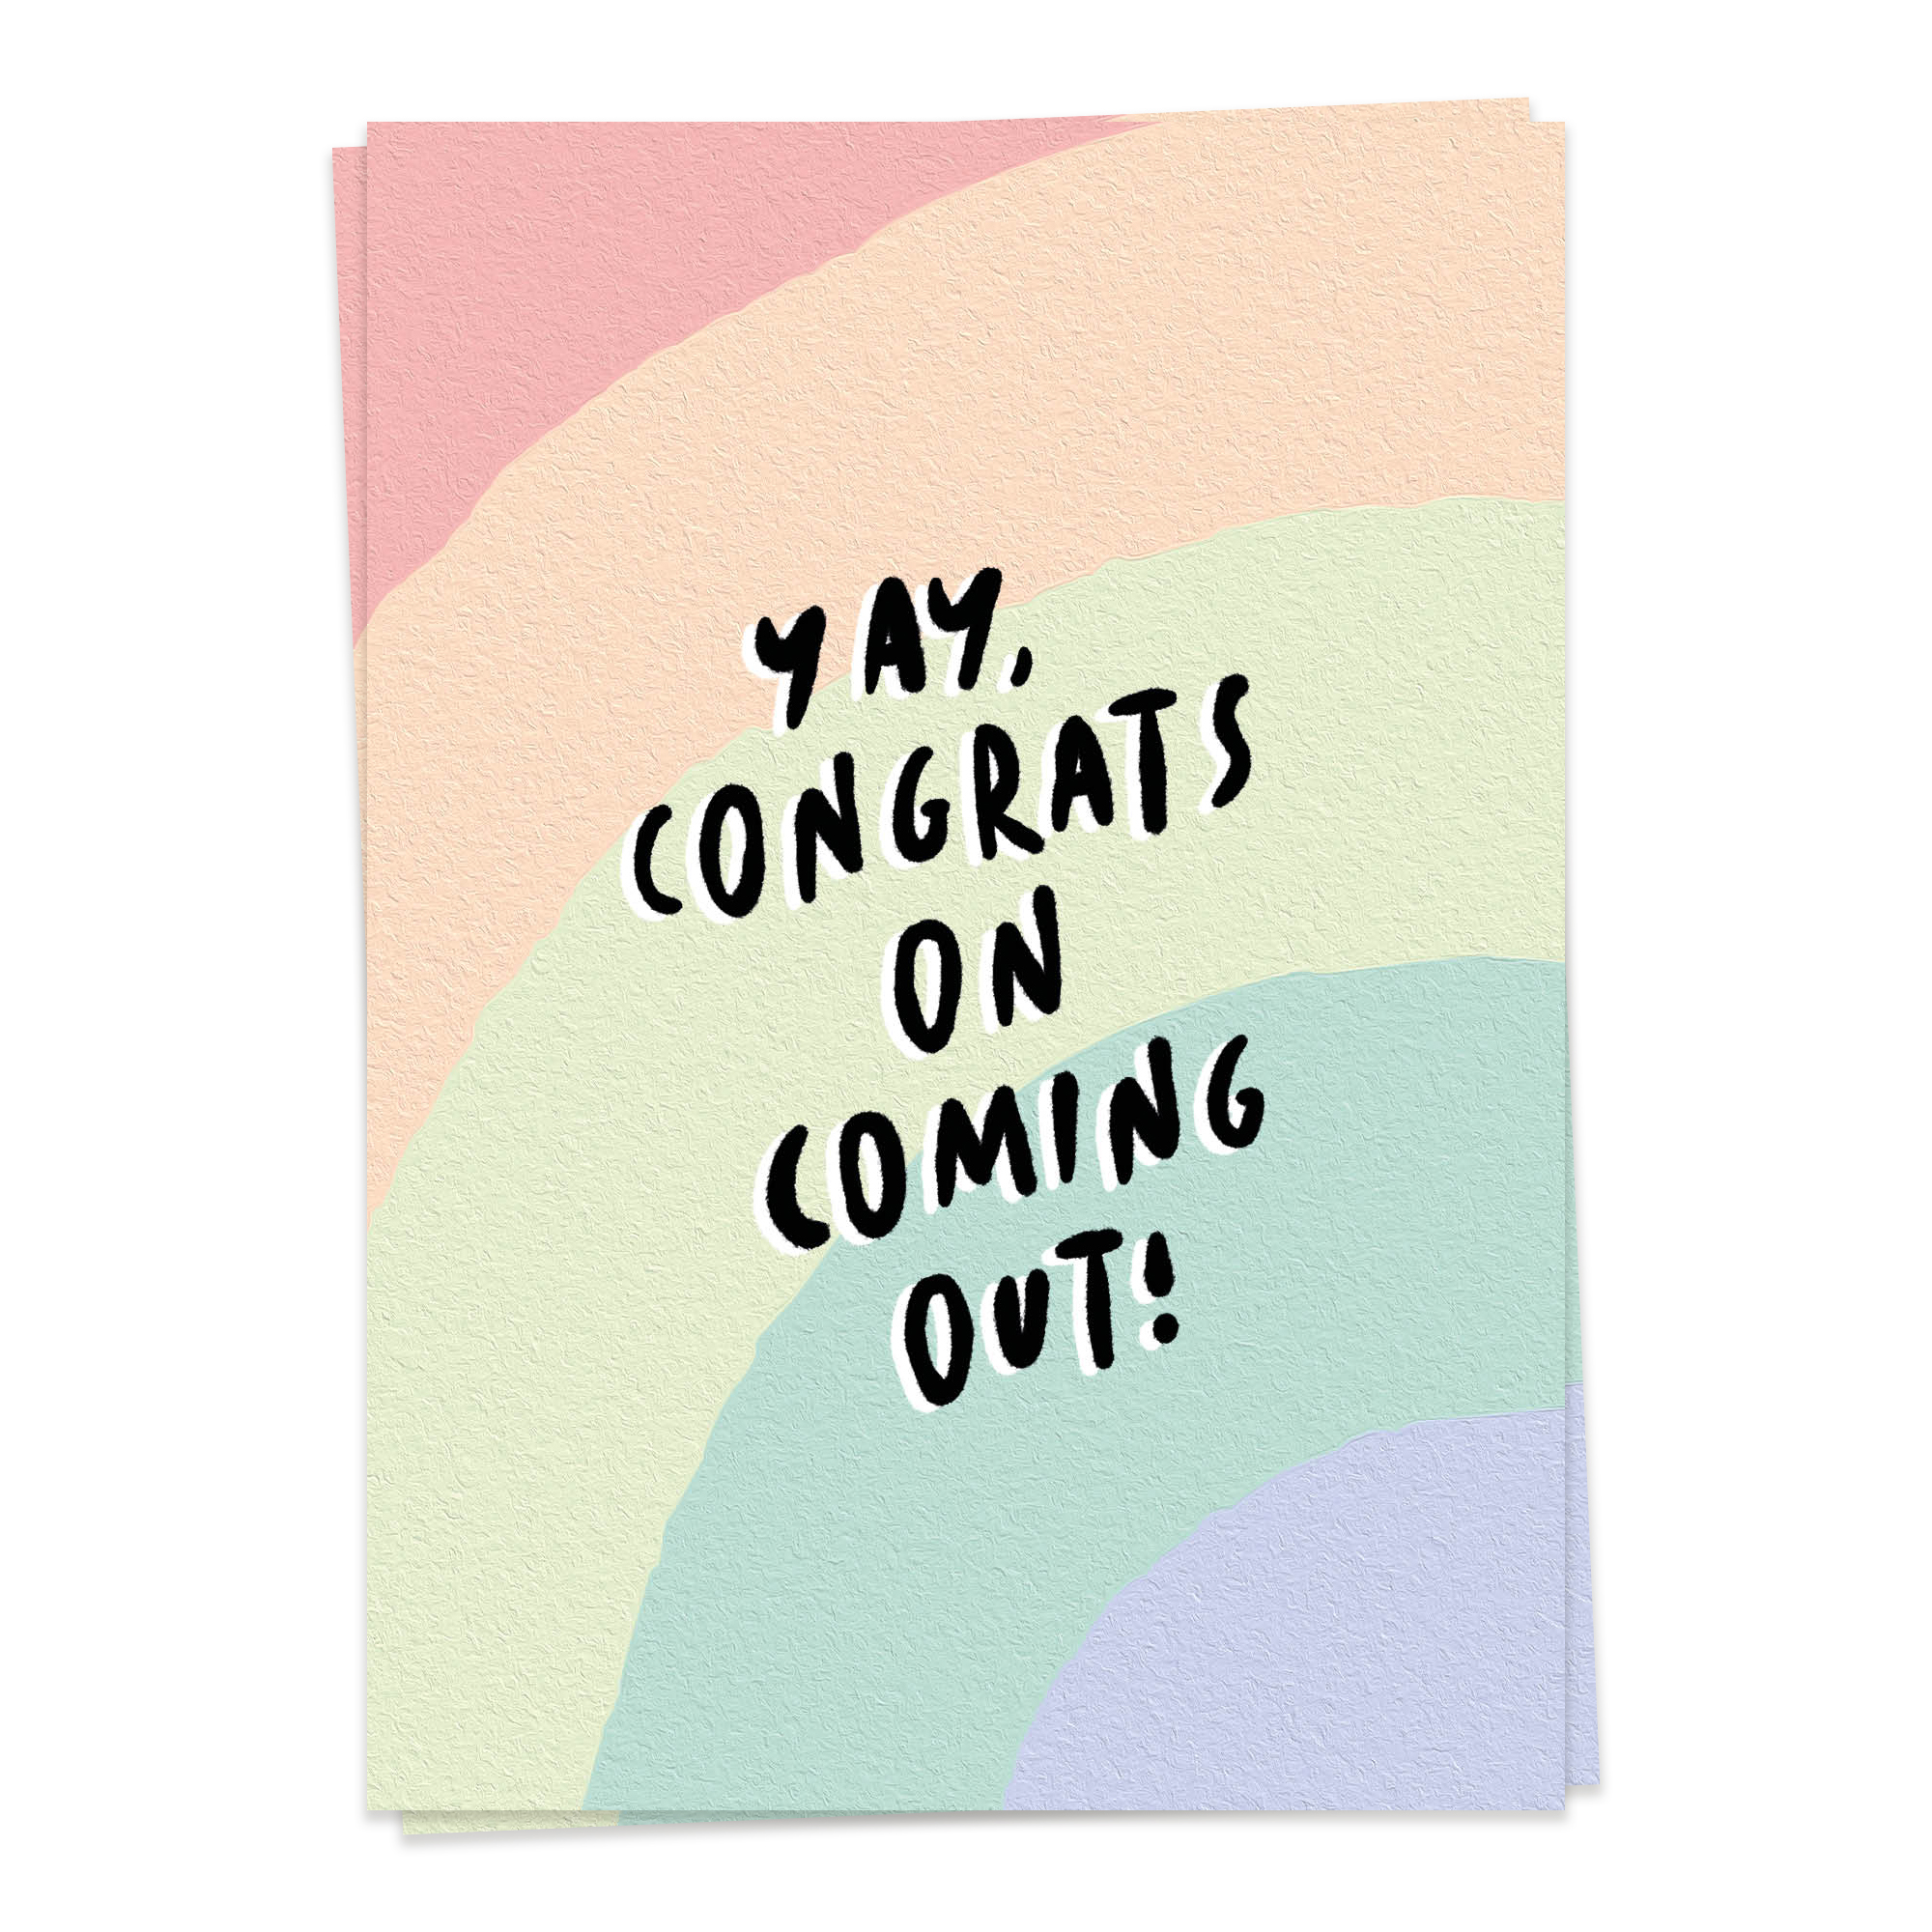 LGBTQ – Coming out